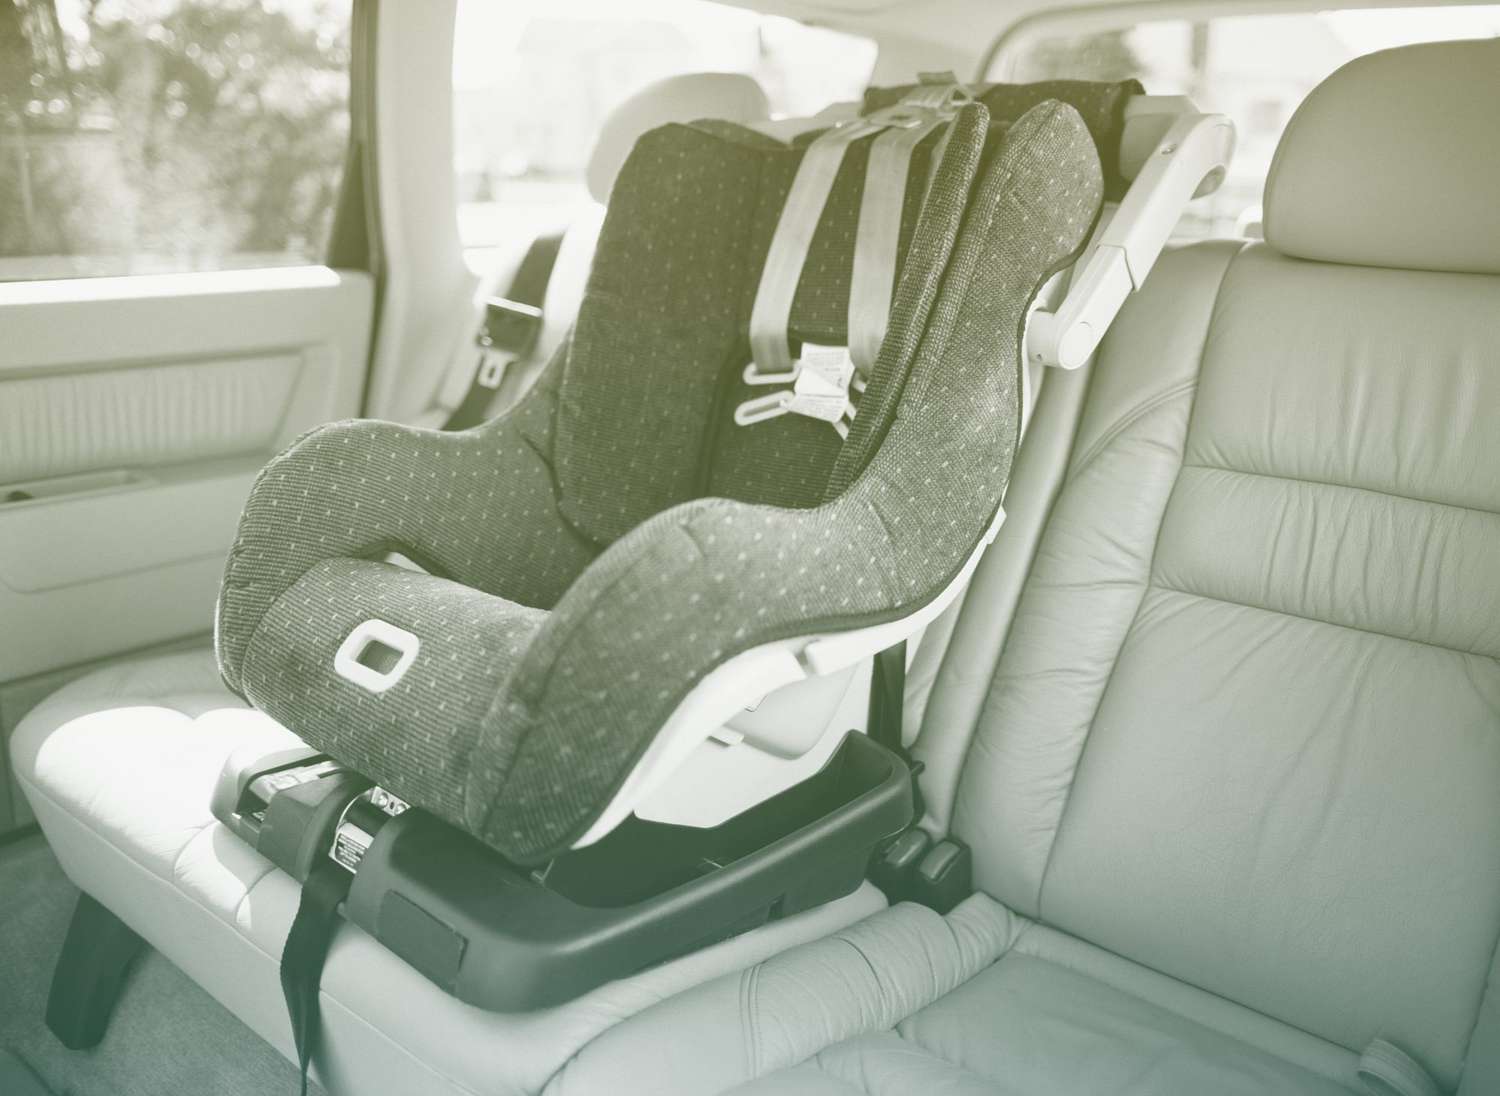 The Best Ways To Clean Car Seats Pas - How To Clean Seat Cover